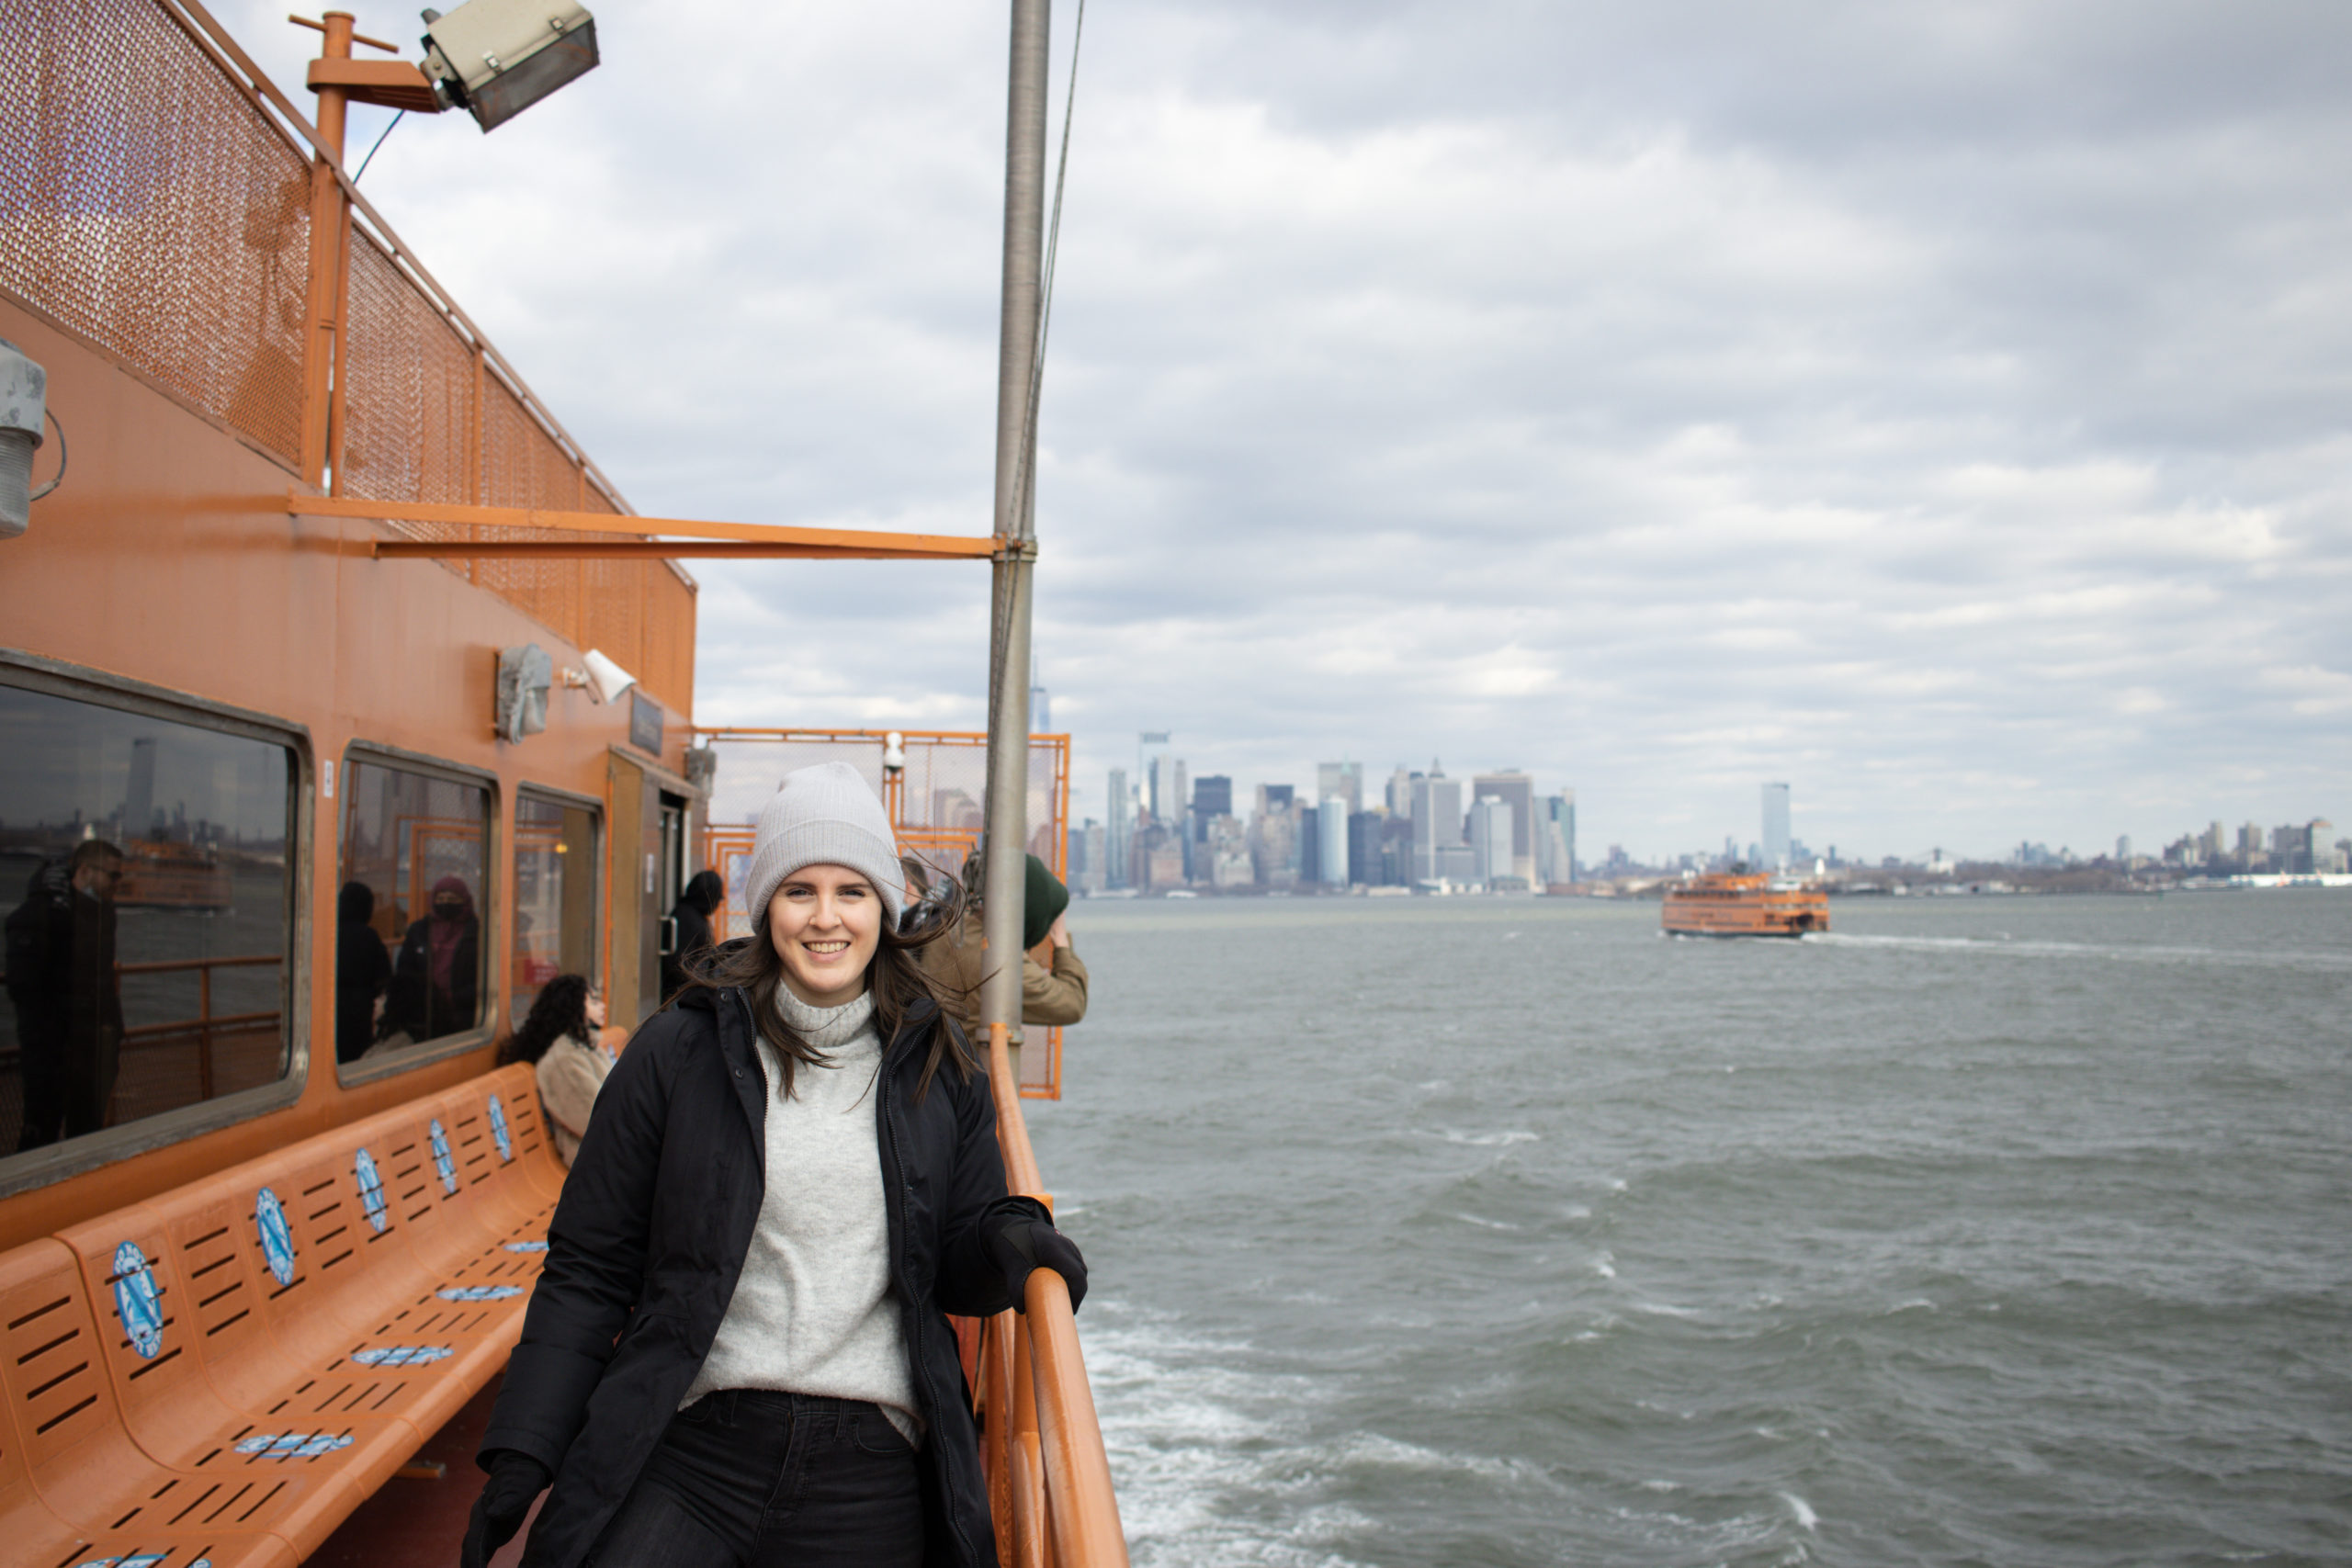 A woman on the Staten Island Ferry with the Manhattan skyline in the background.